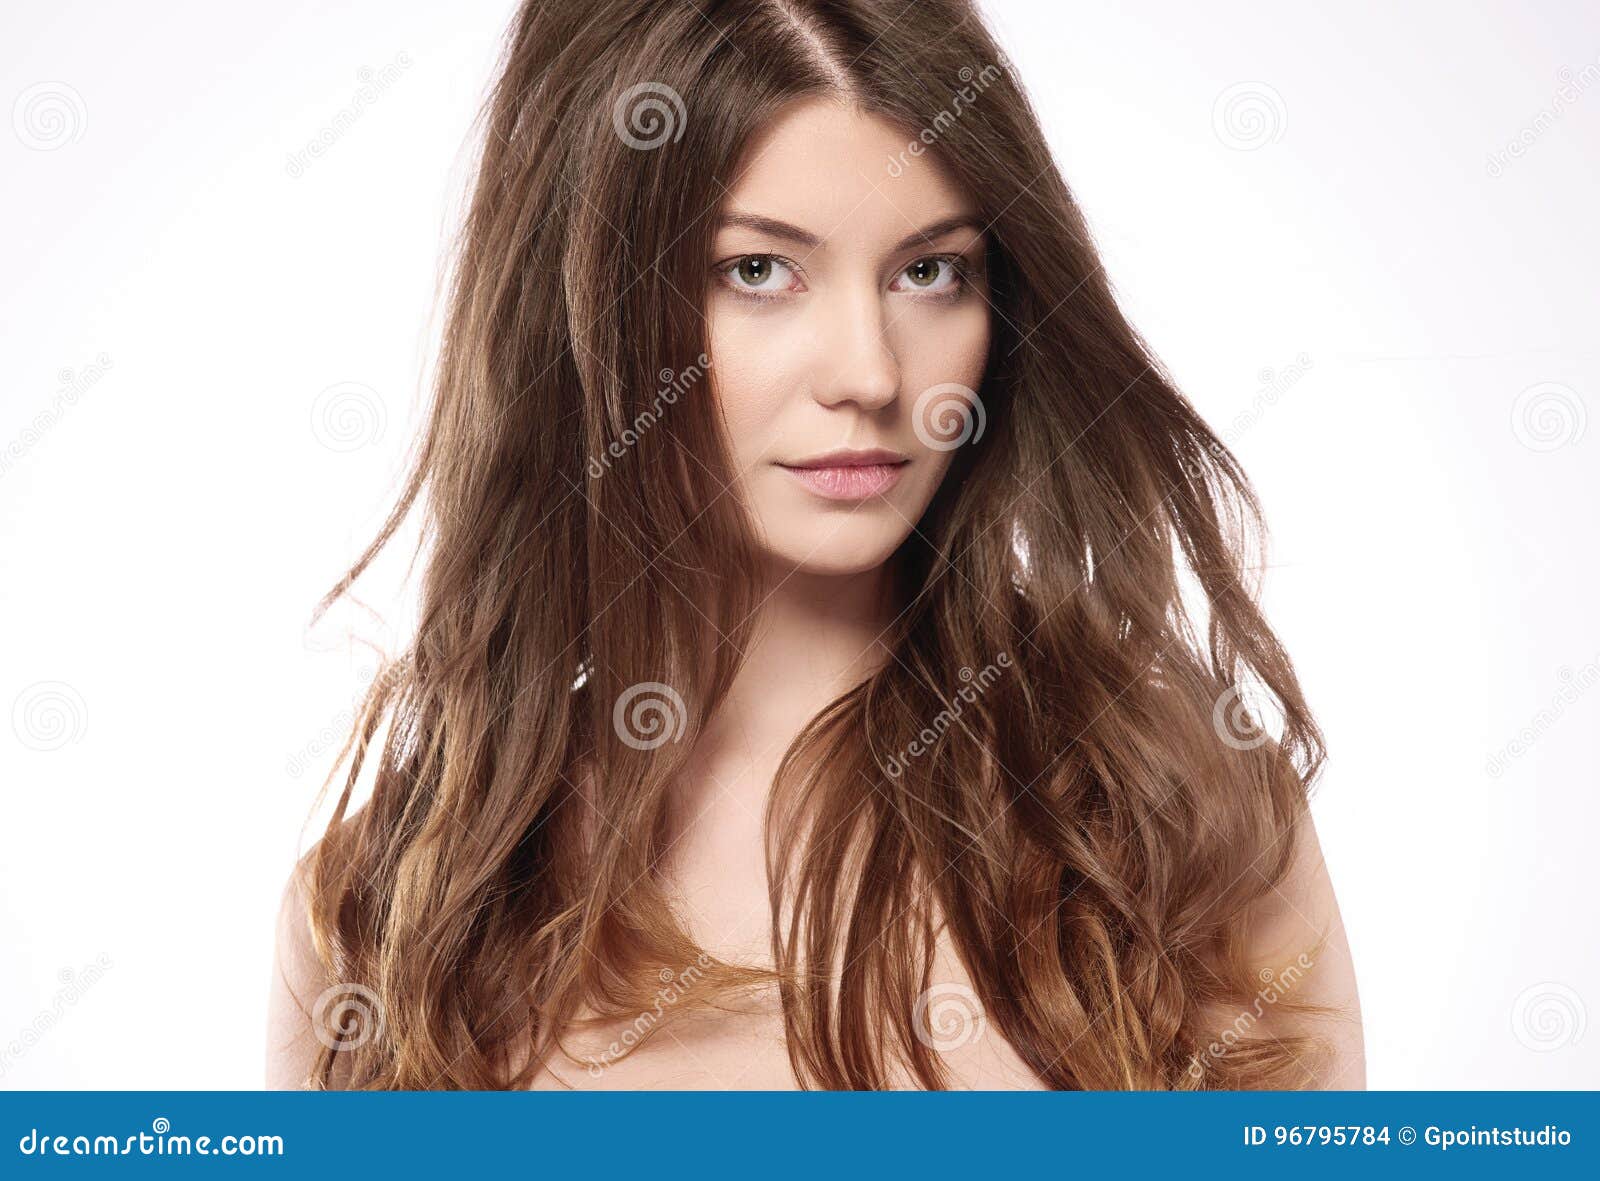 Natural beuaty stock photo. Image of body, perfection - 96795784